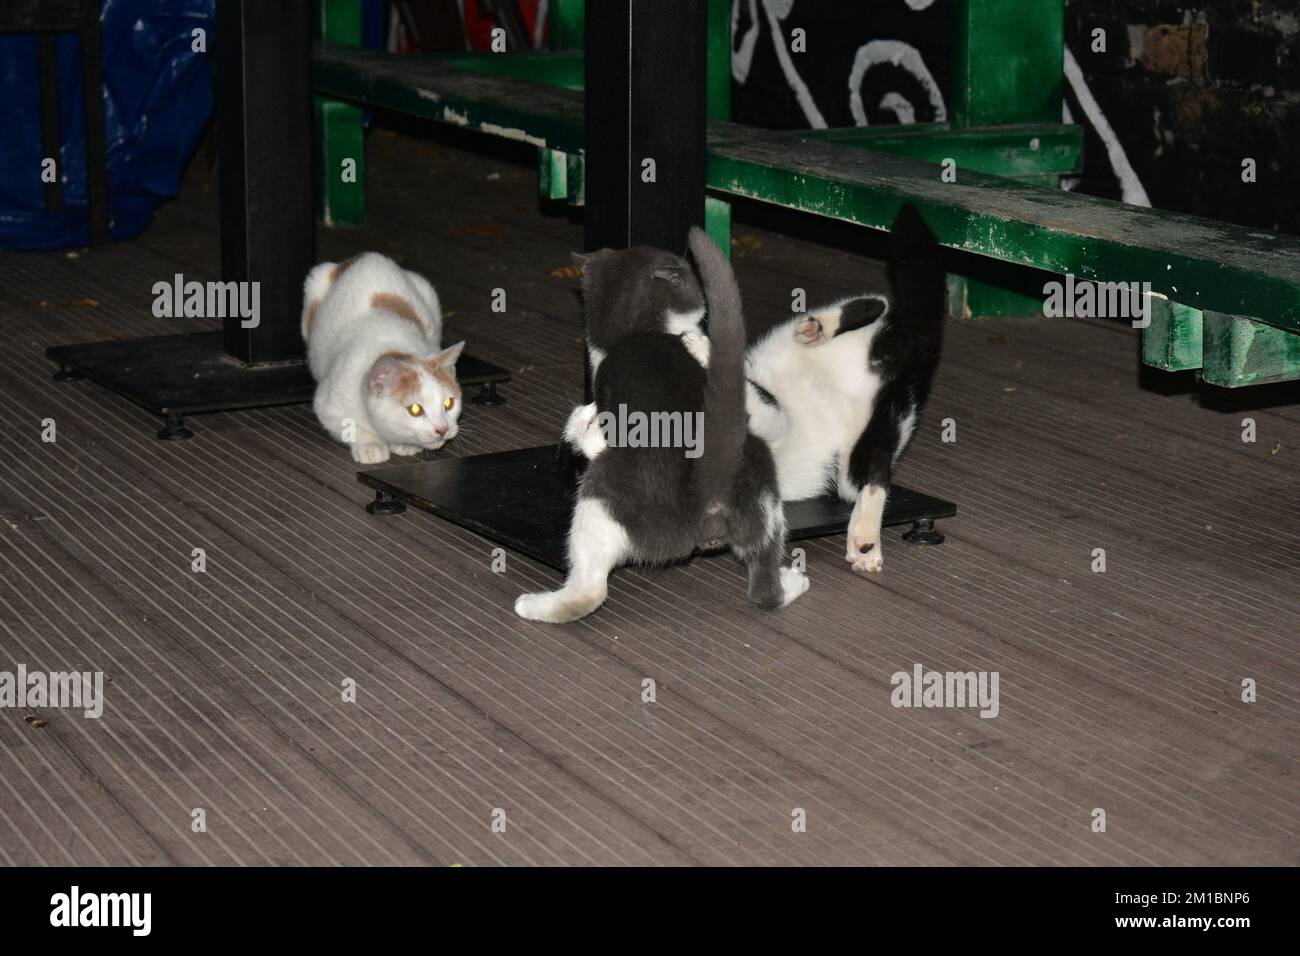 ginger-white, gray-white and black-white cats playing Stock Photo